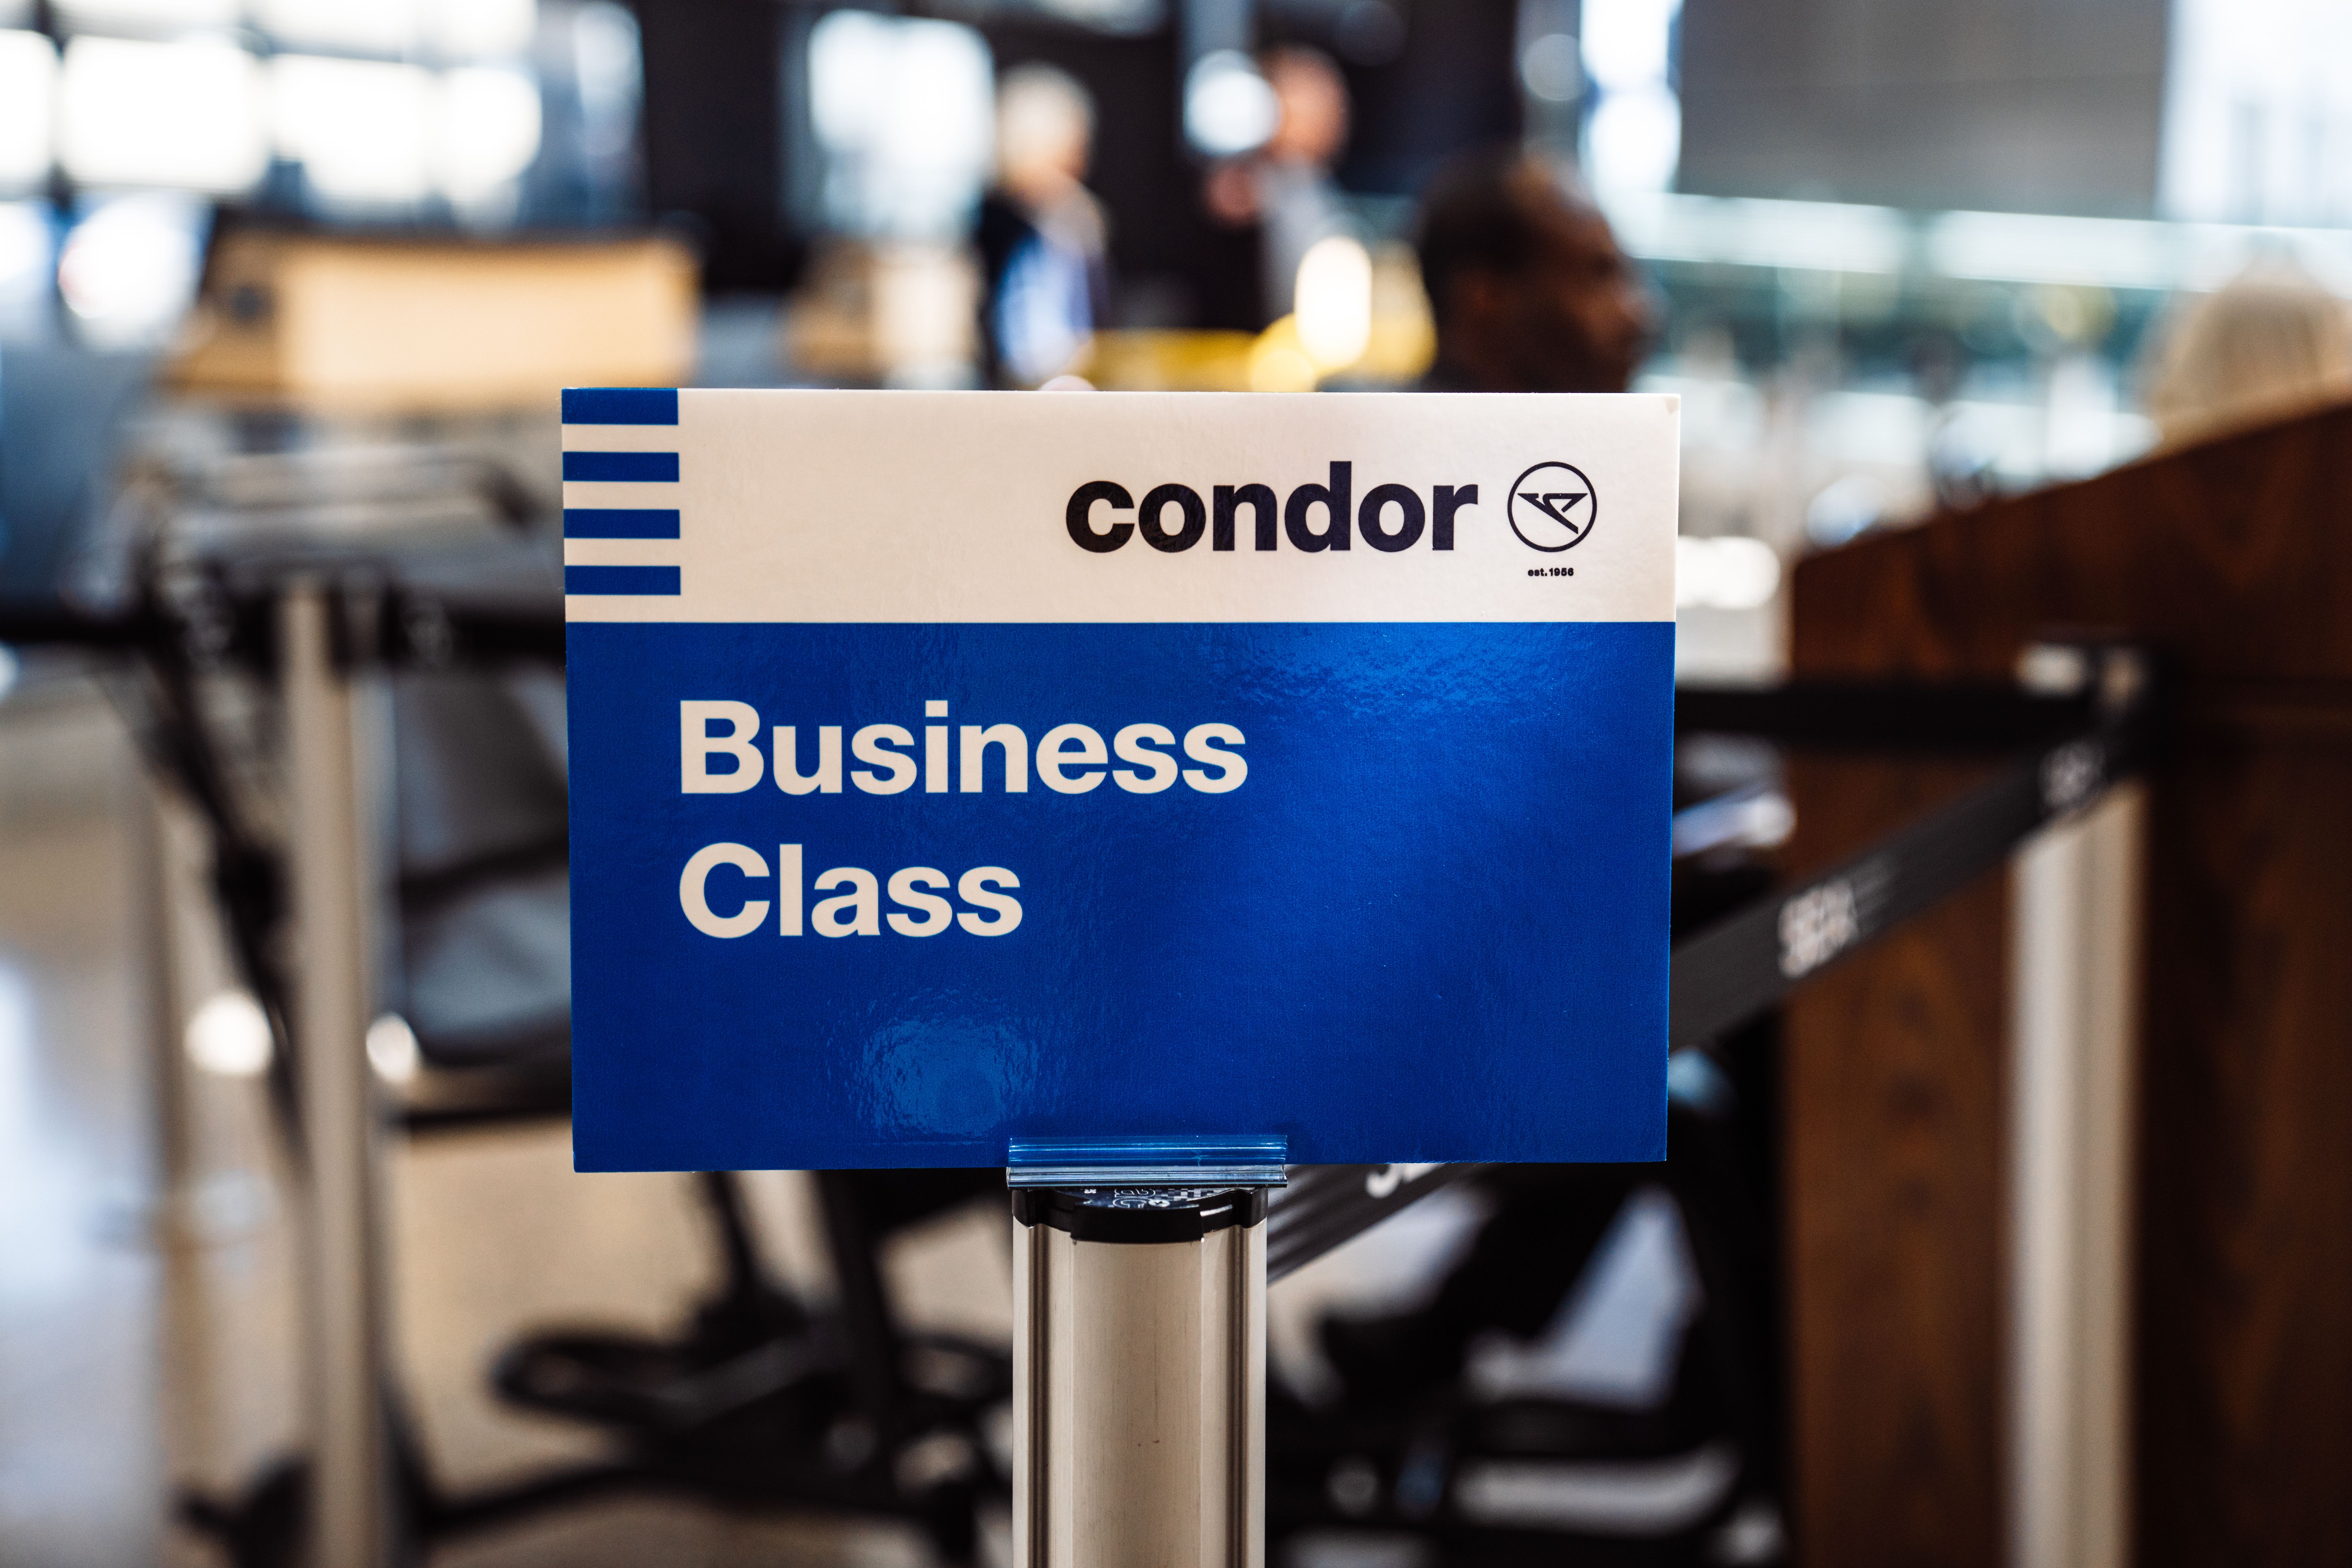 Condor Business class check in sign